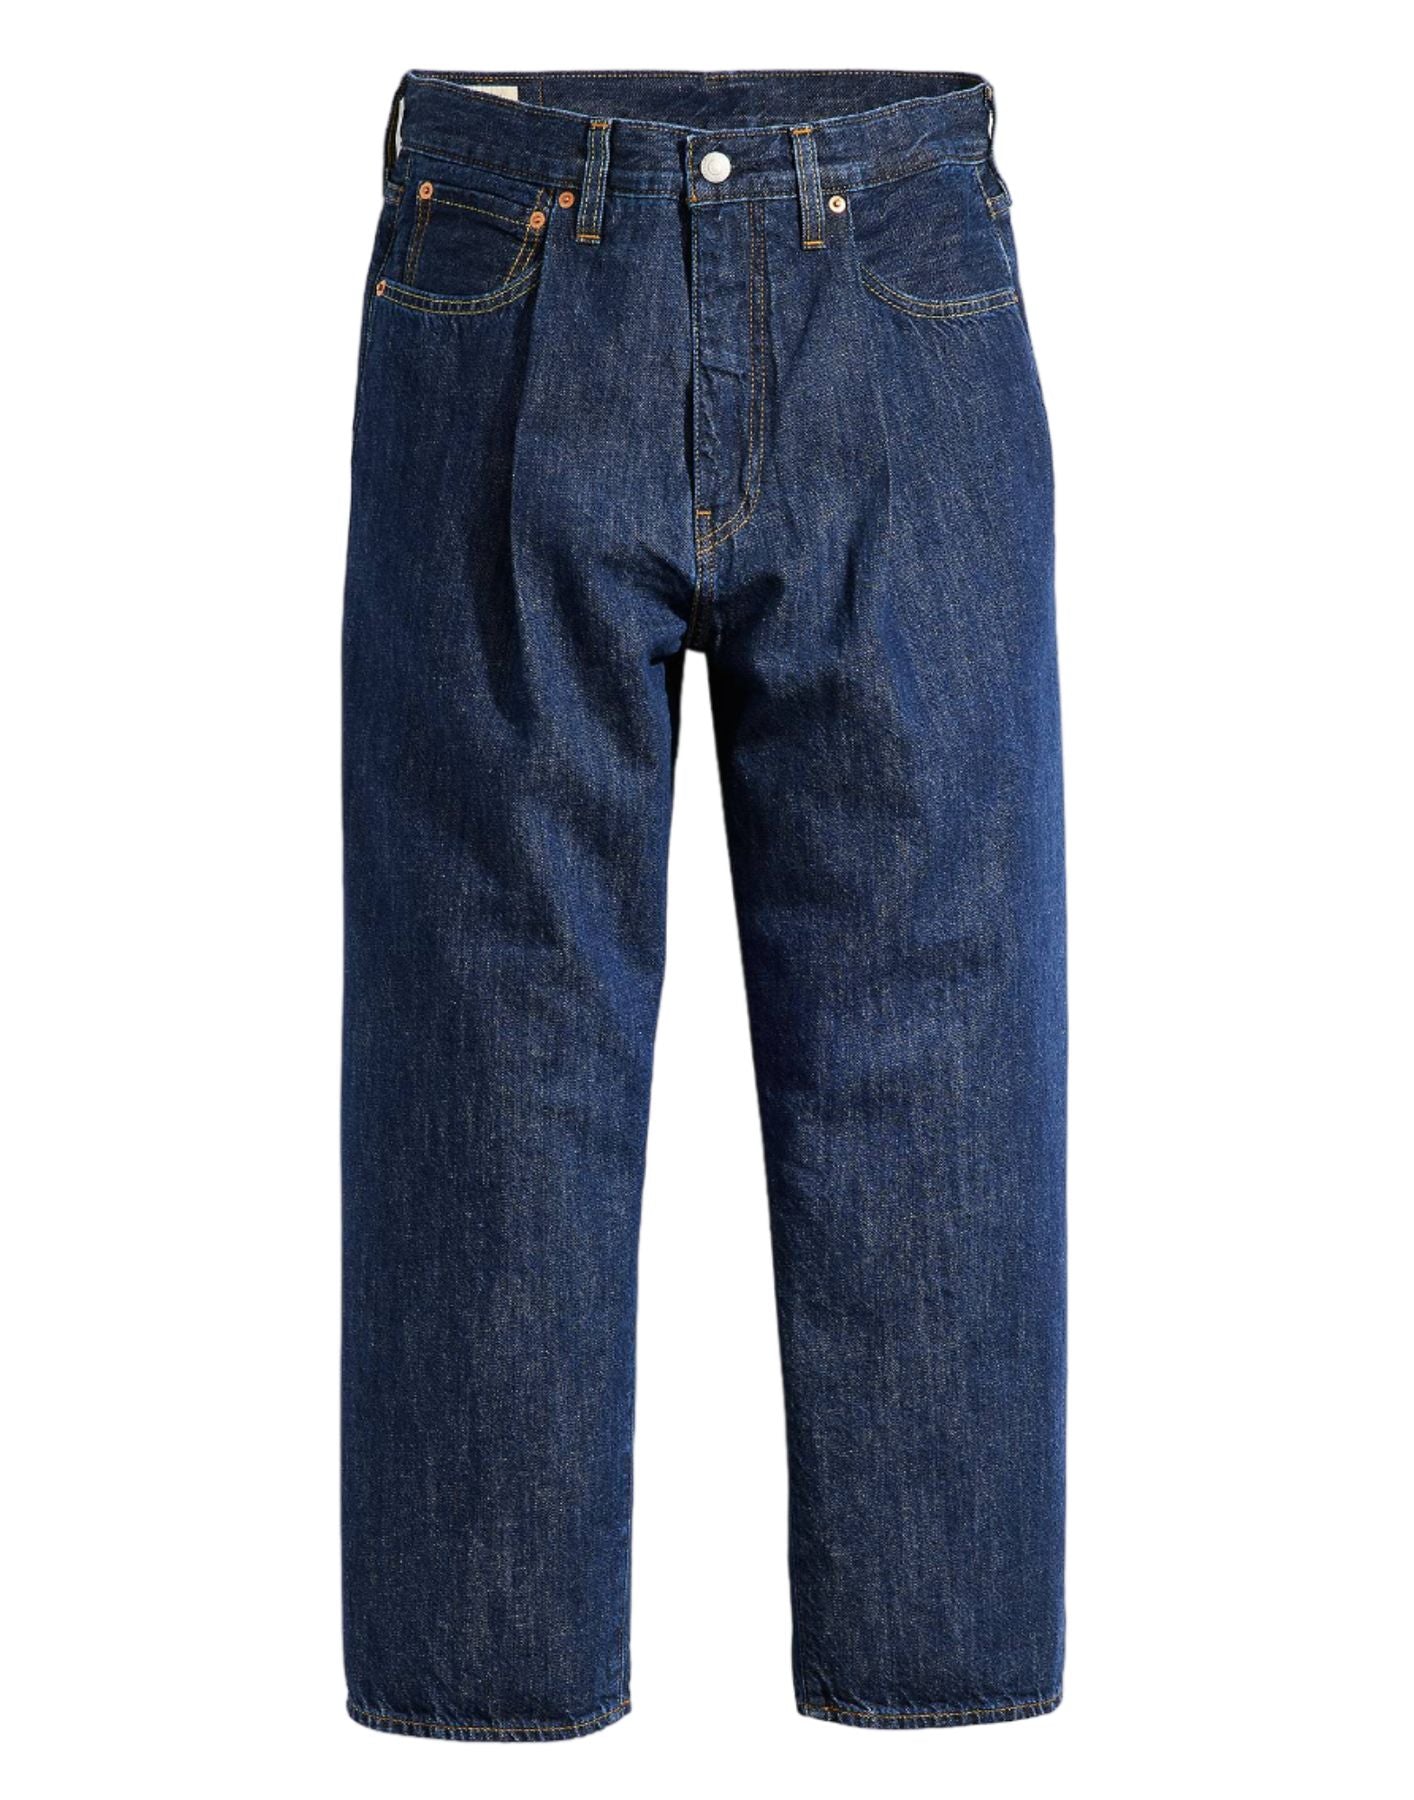 Jeans for man 399570010 Levi's